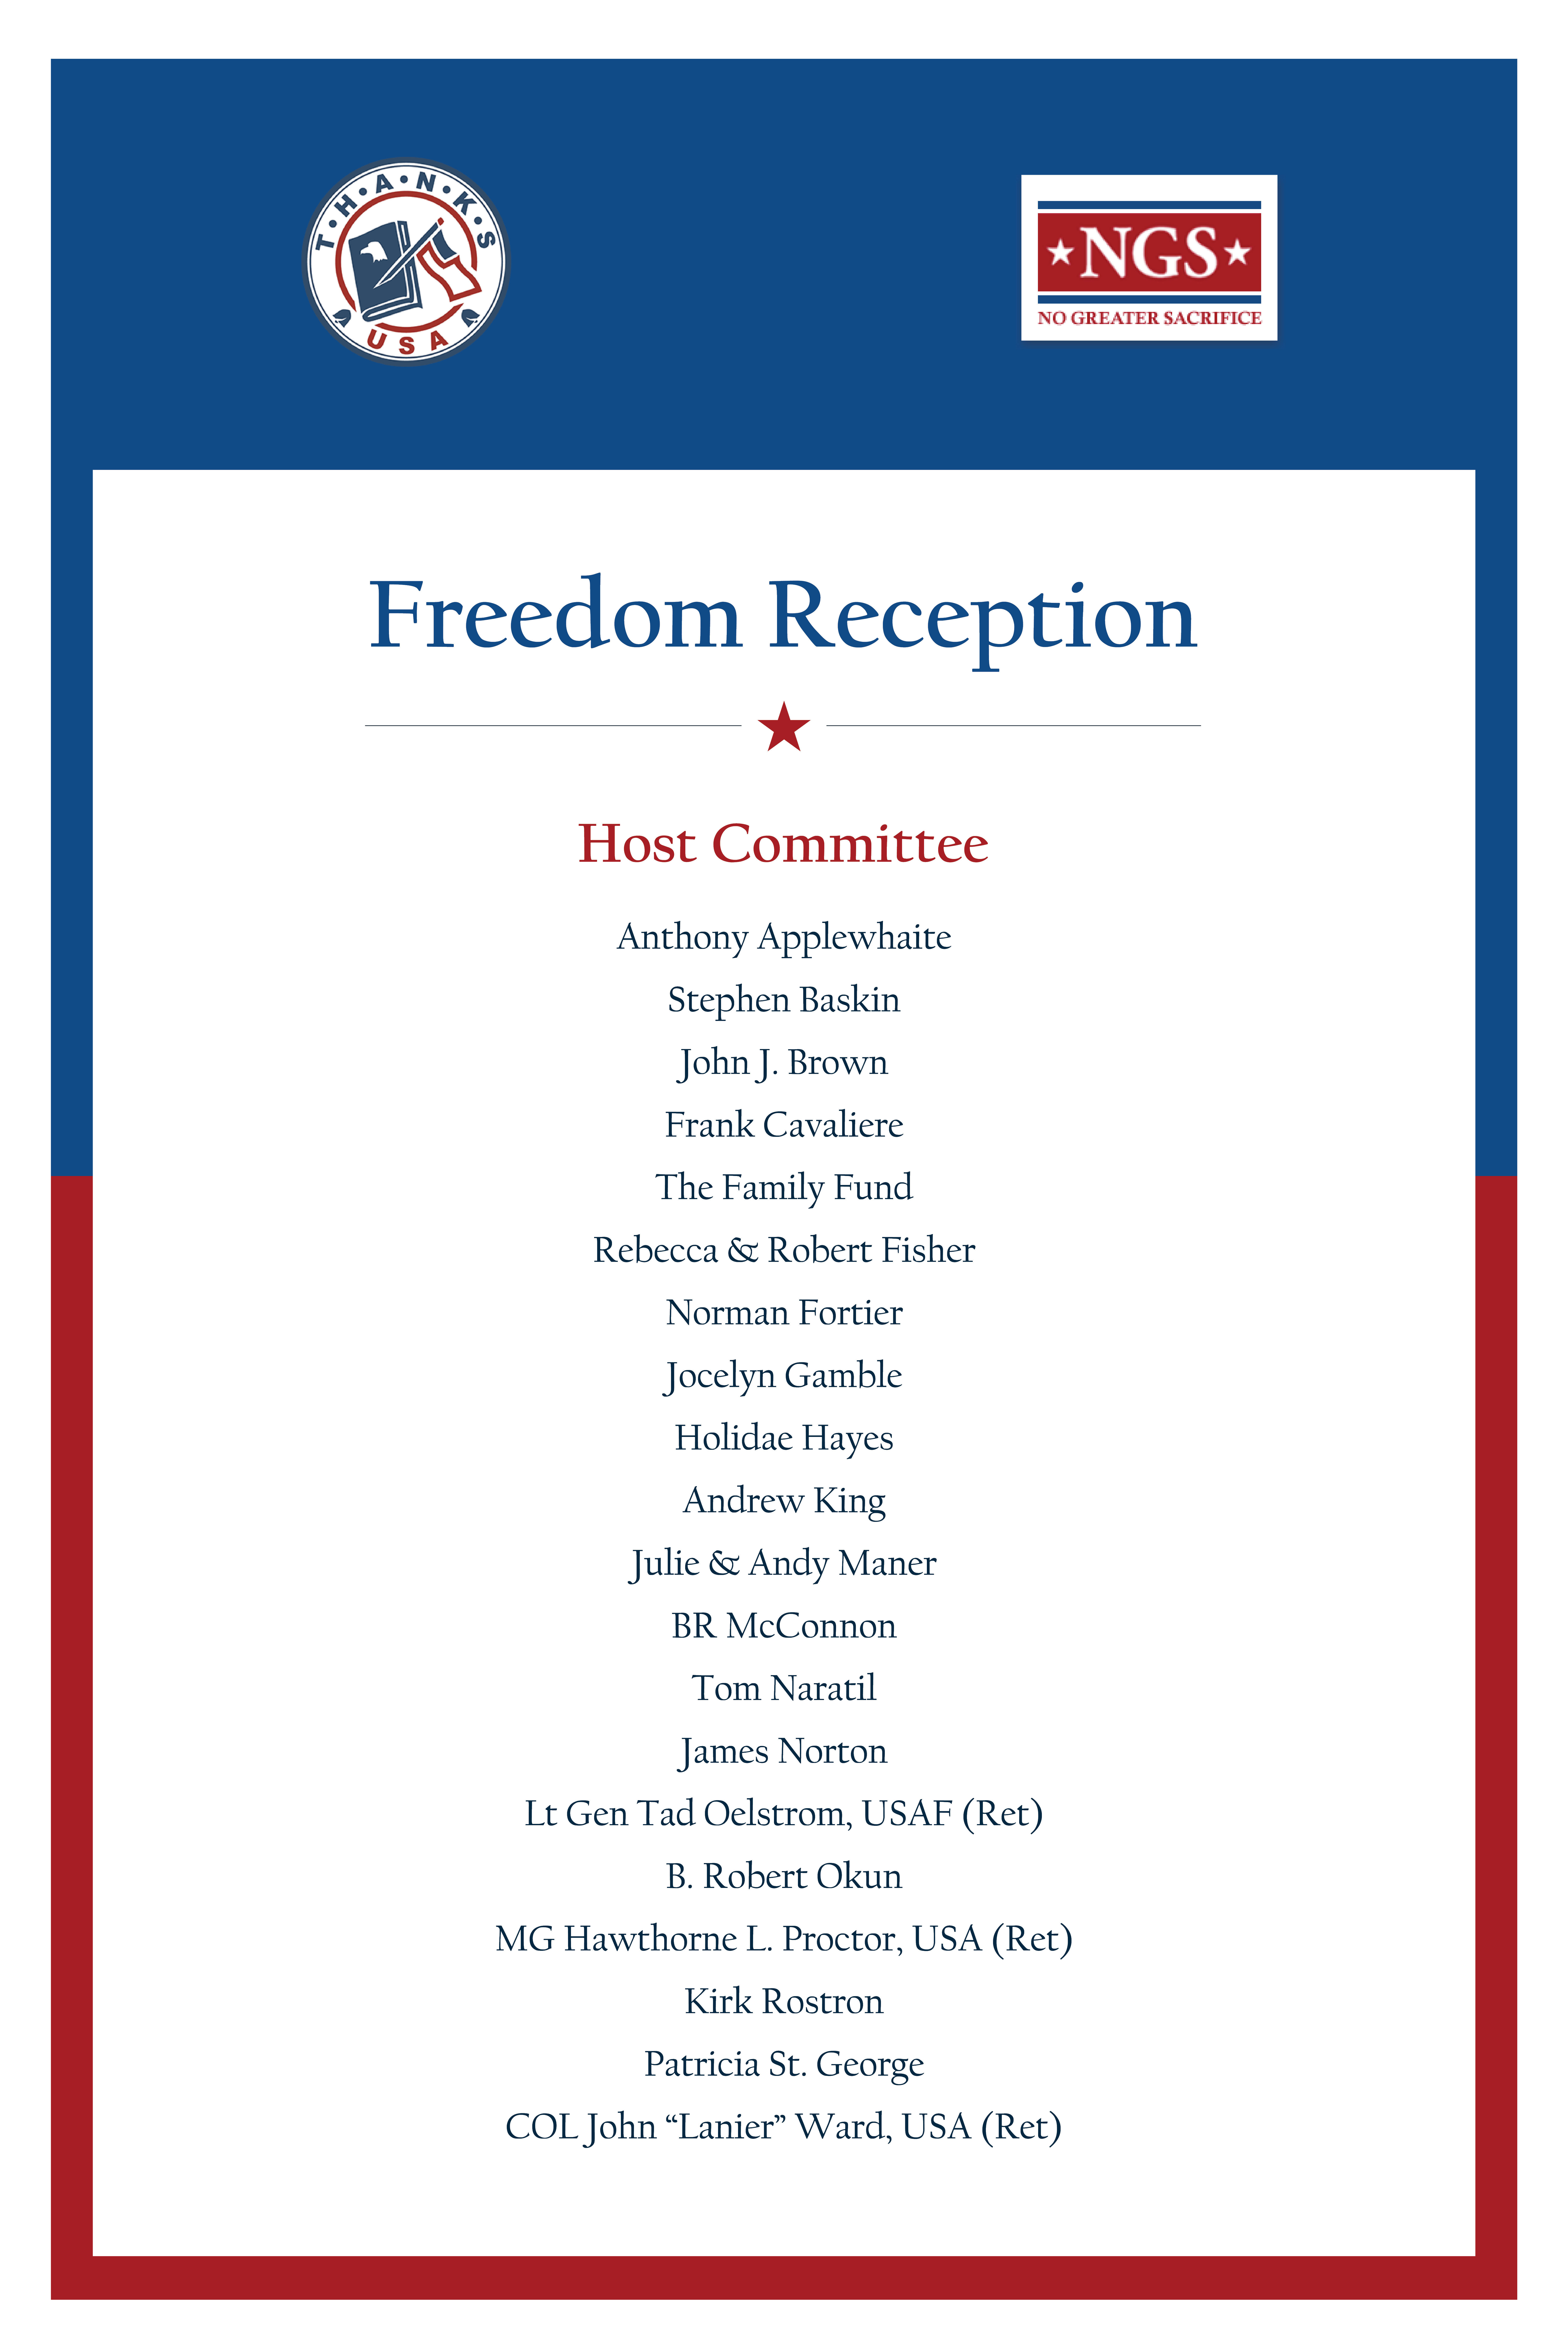 2022 freedom reception host committee